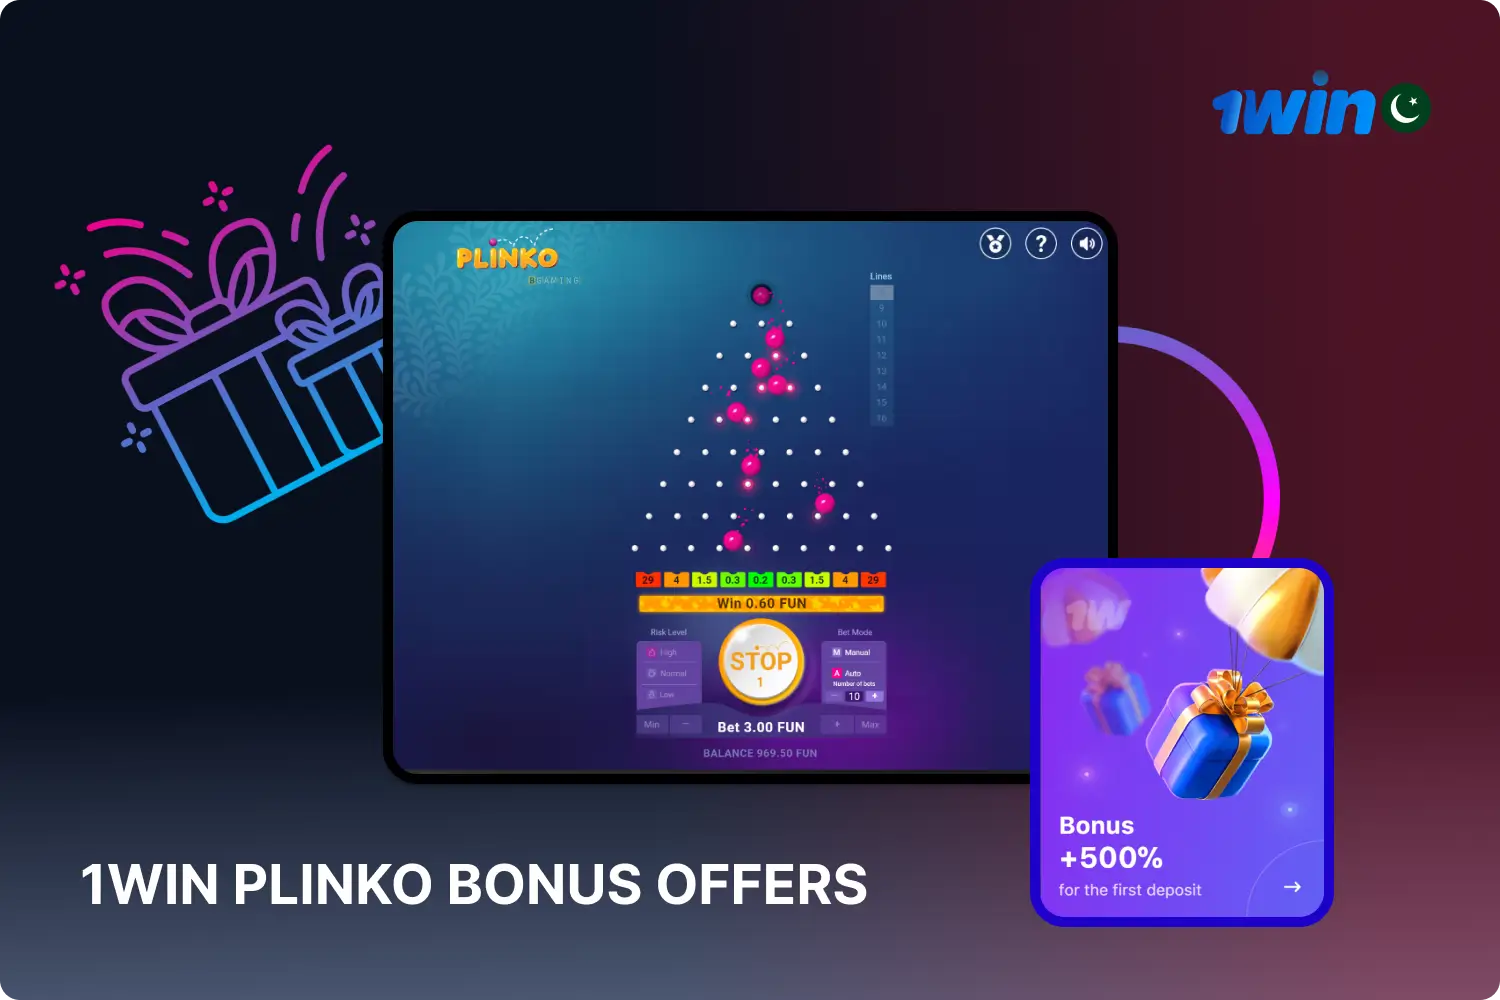 New 1win users from Pakistan can get a welcome bonus and use it to play Plinko